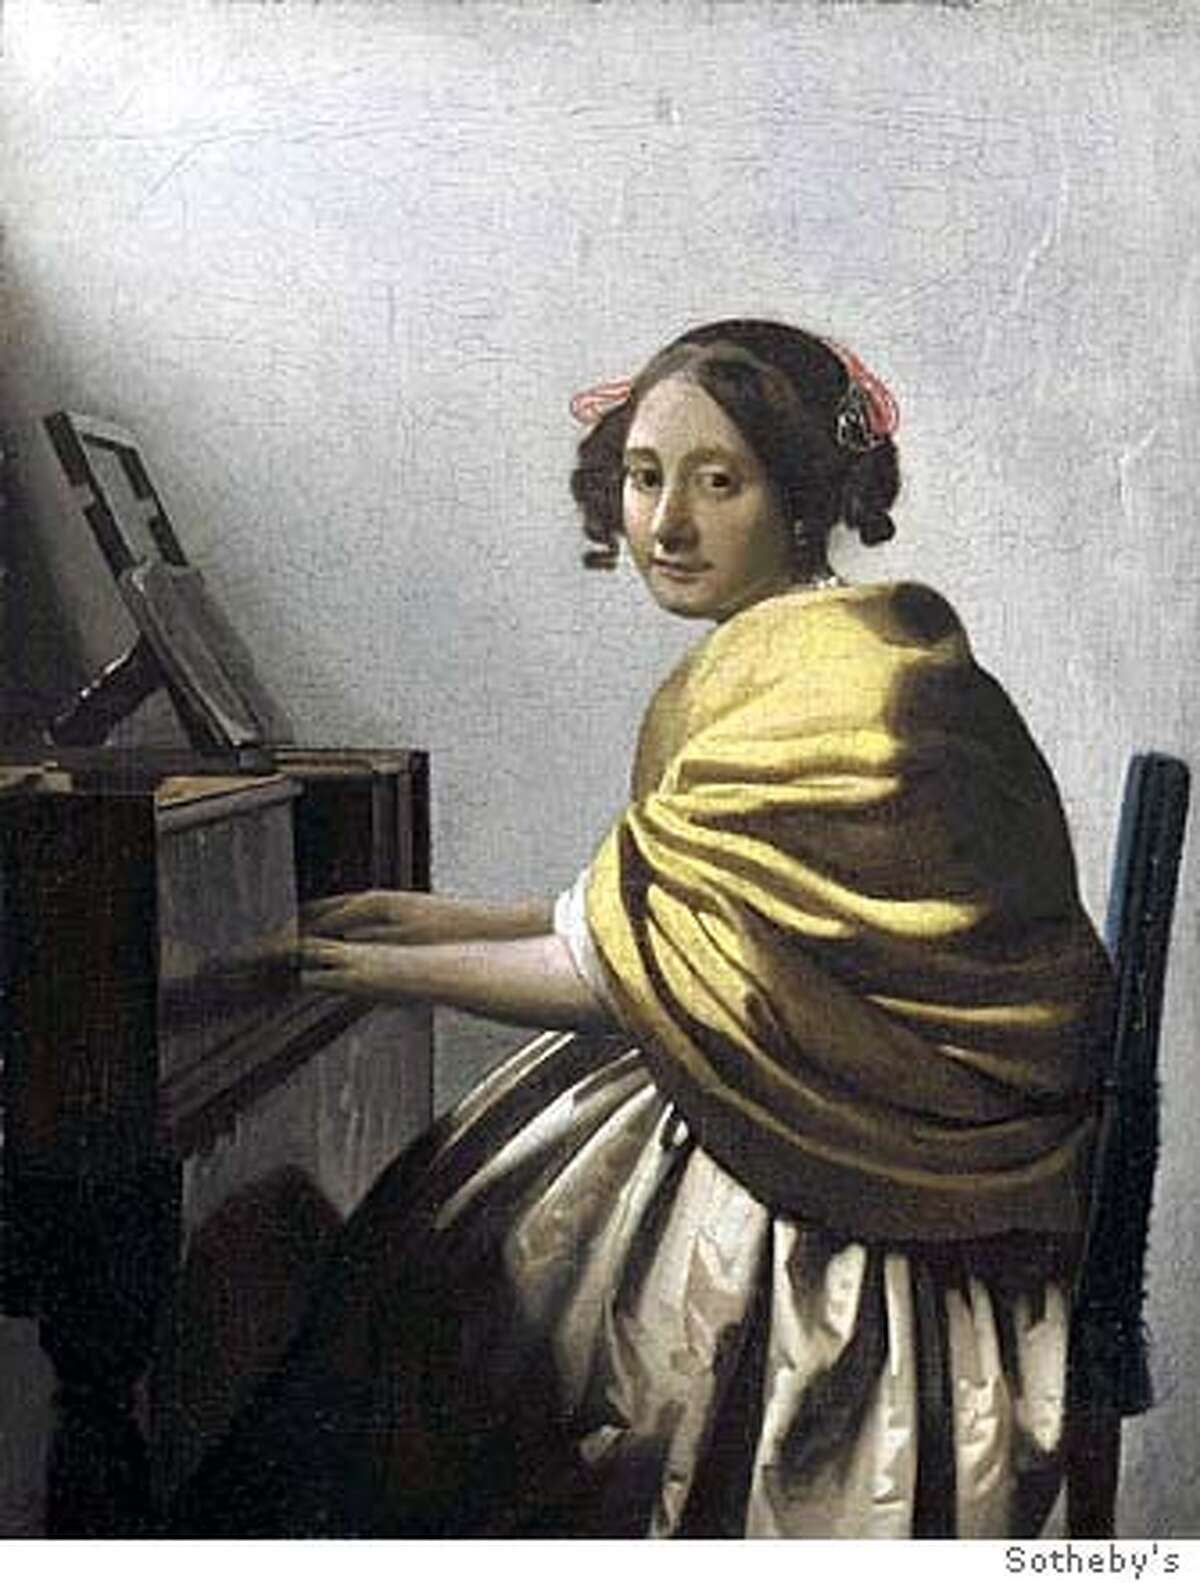 (NYT8) UNDATED -- March 30, 2004 -- VERMEER-AUCTION -- Sotheby's is offering the first Vermeer to go to auction in more than 80 years. For decades this painting, "Young Woman Seated at the Virginal," had been thought by experts to be a fake, but after 10 years of analysis it has been judged to be by the artist. (Sotheby's/The New York Times) *FOR USE ONLY WITH STORY BY CAROL VOGEL -- ALL OTHER USE PROHIBITED XNYZ HFO